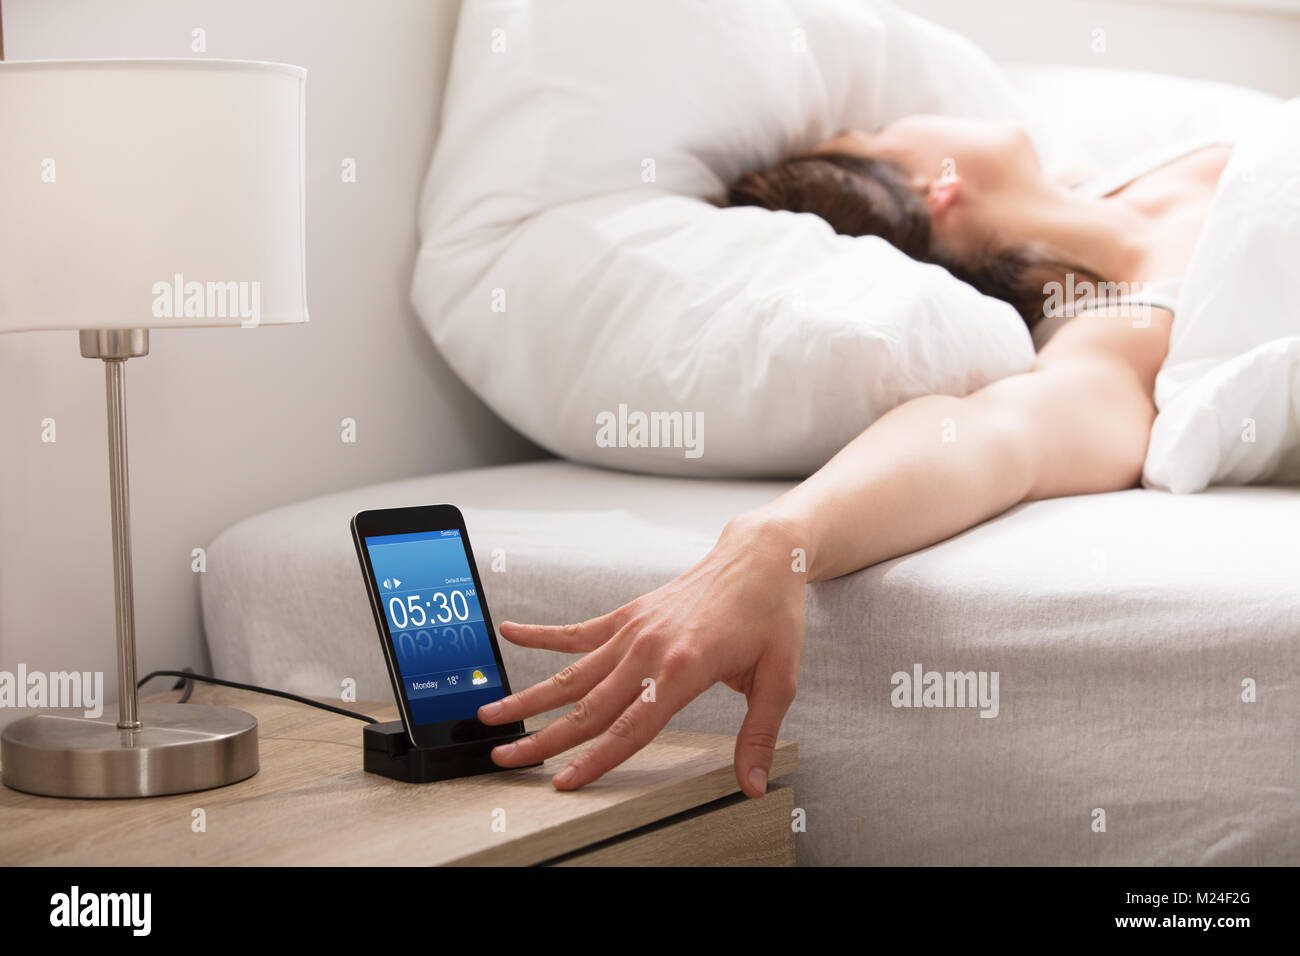 Woman Turning Off The Alarm On Cell Phone While Waking Up In The Morning Stock Photo